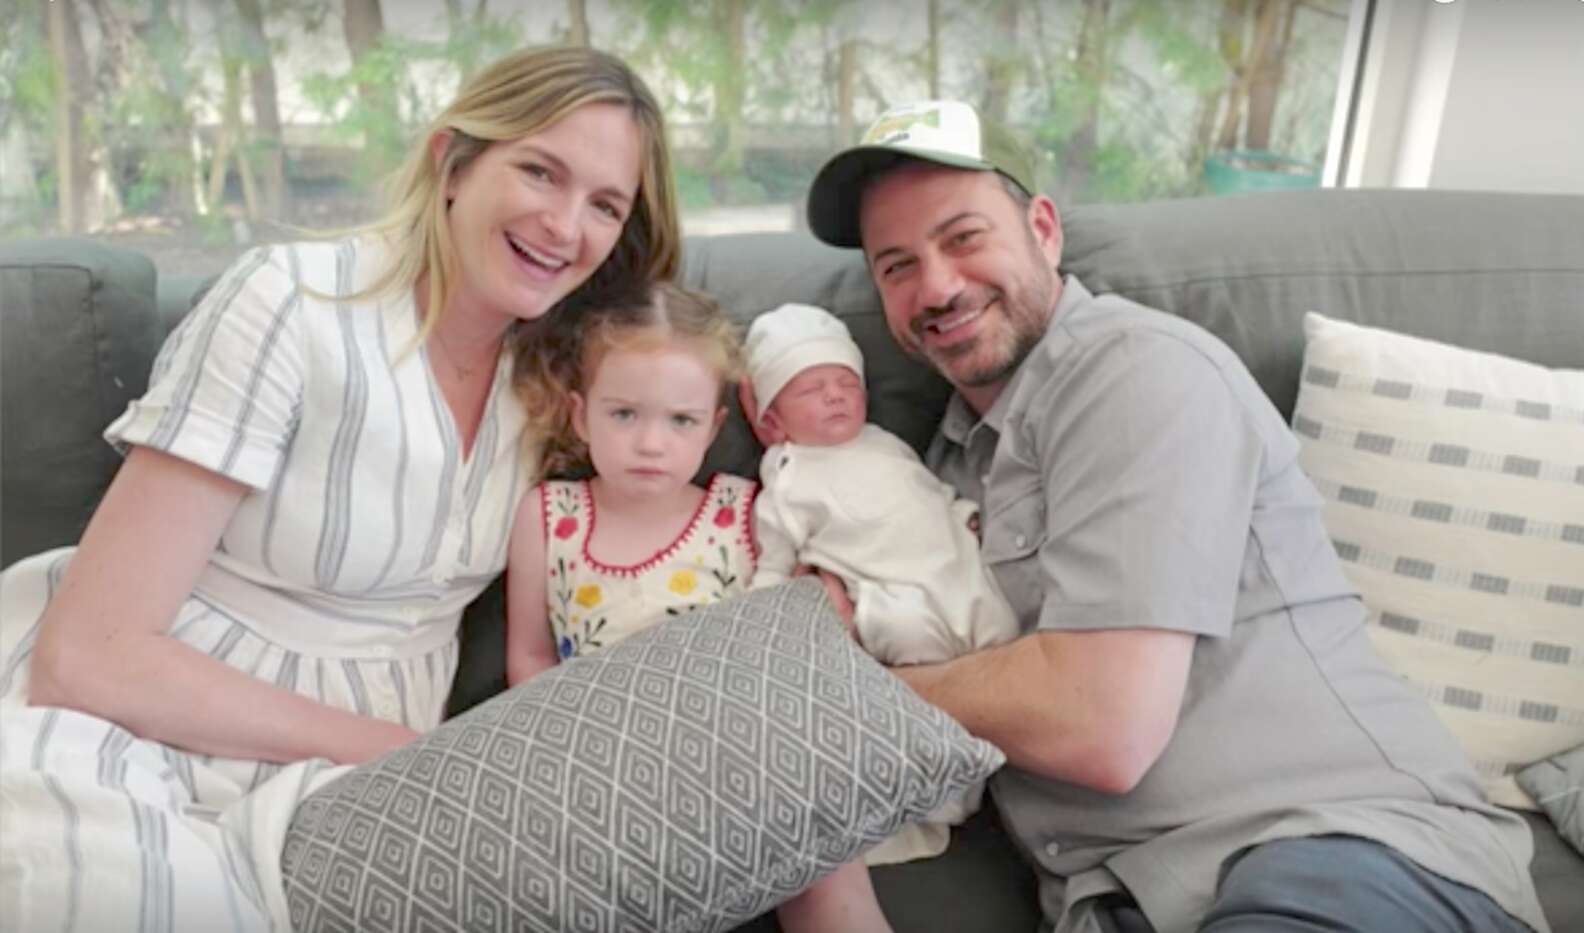 Jimmy Kimmel Delivered an Emotional Monologue About Newborn Son's Heart